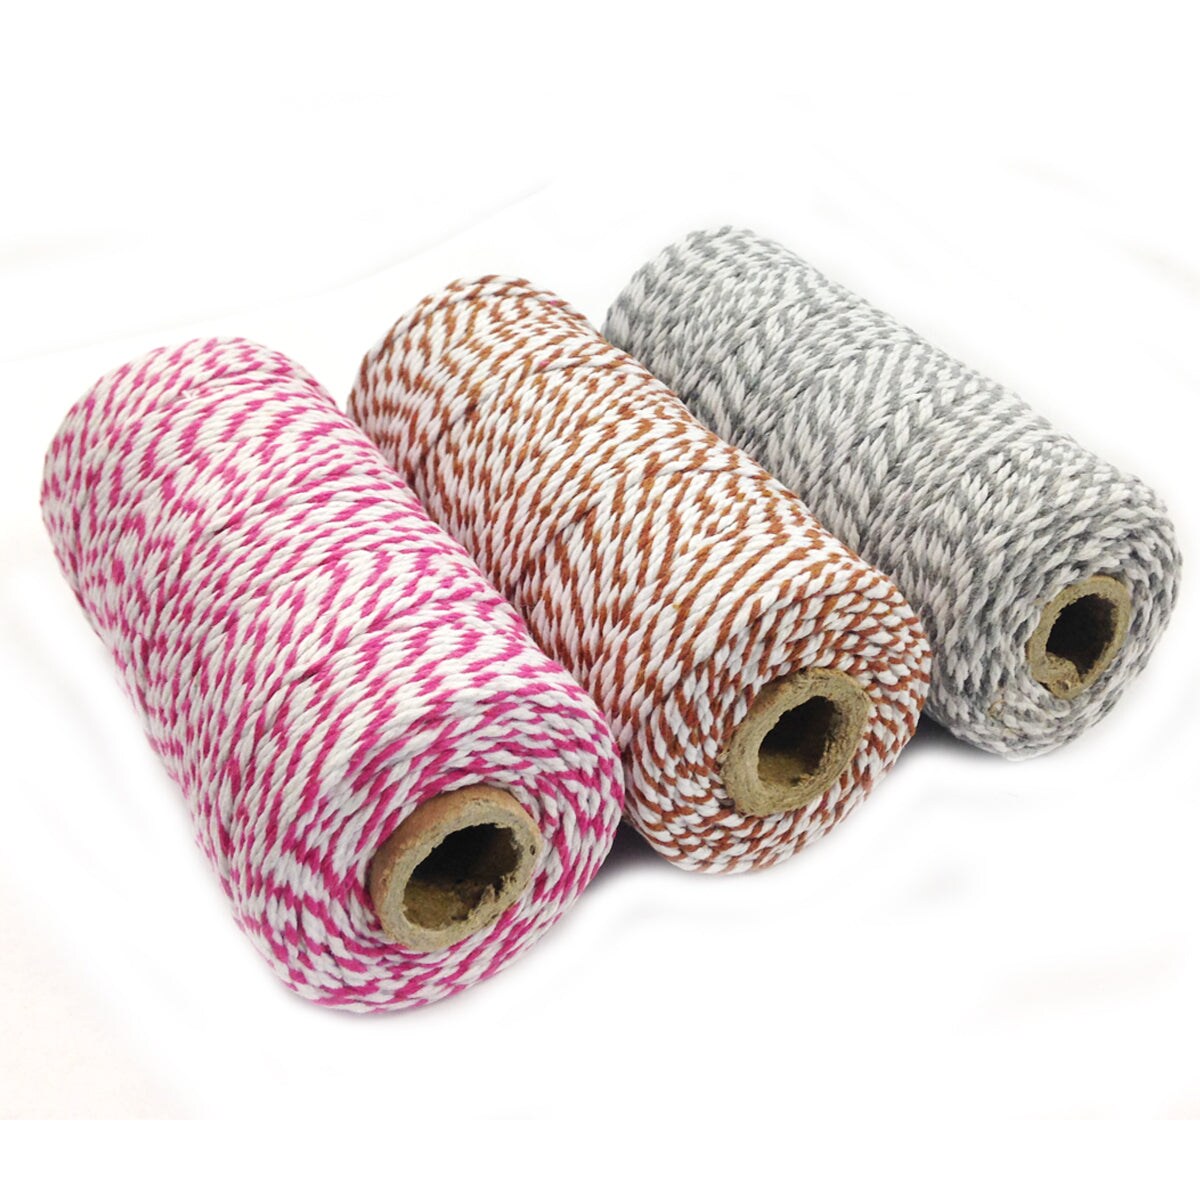 Wrapables Cotton Baker&#x27;s Twine 12ply 330 Yards (Set of 3 Spools x 110 Yards) for Gift Wrapping, Party Decor, and Arts and Crafts (Grey, Brown, Hot Pink)